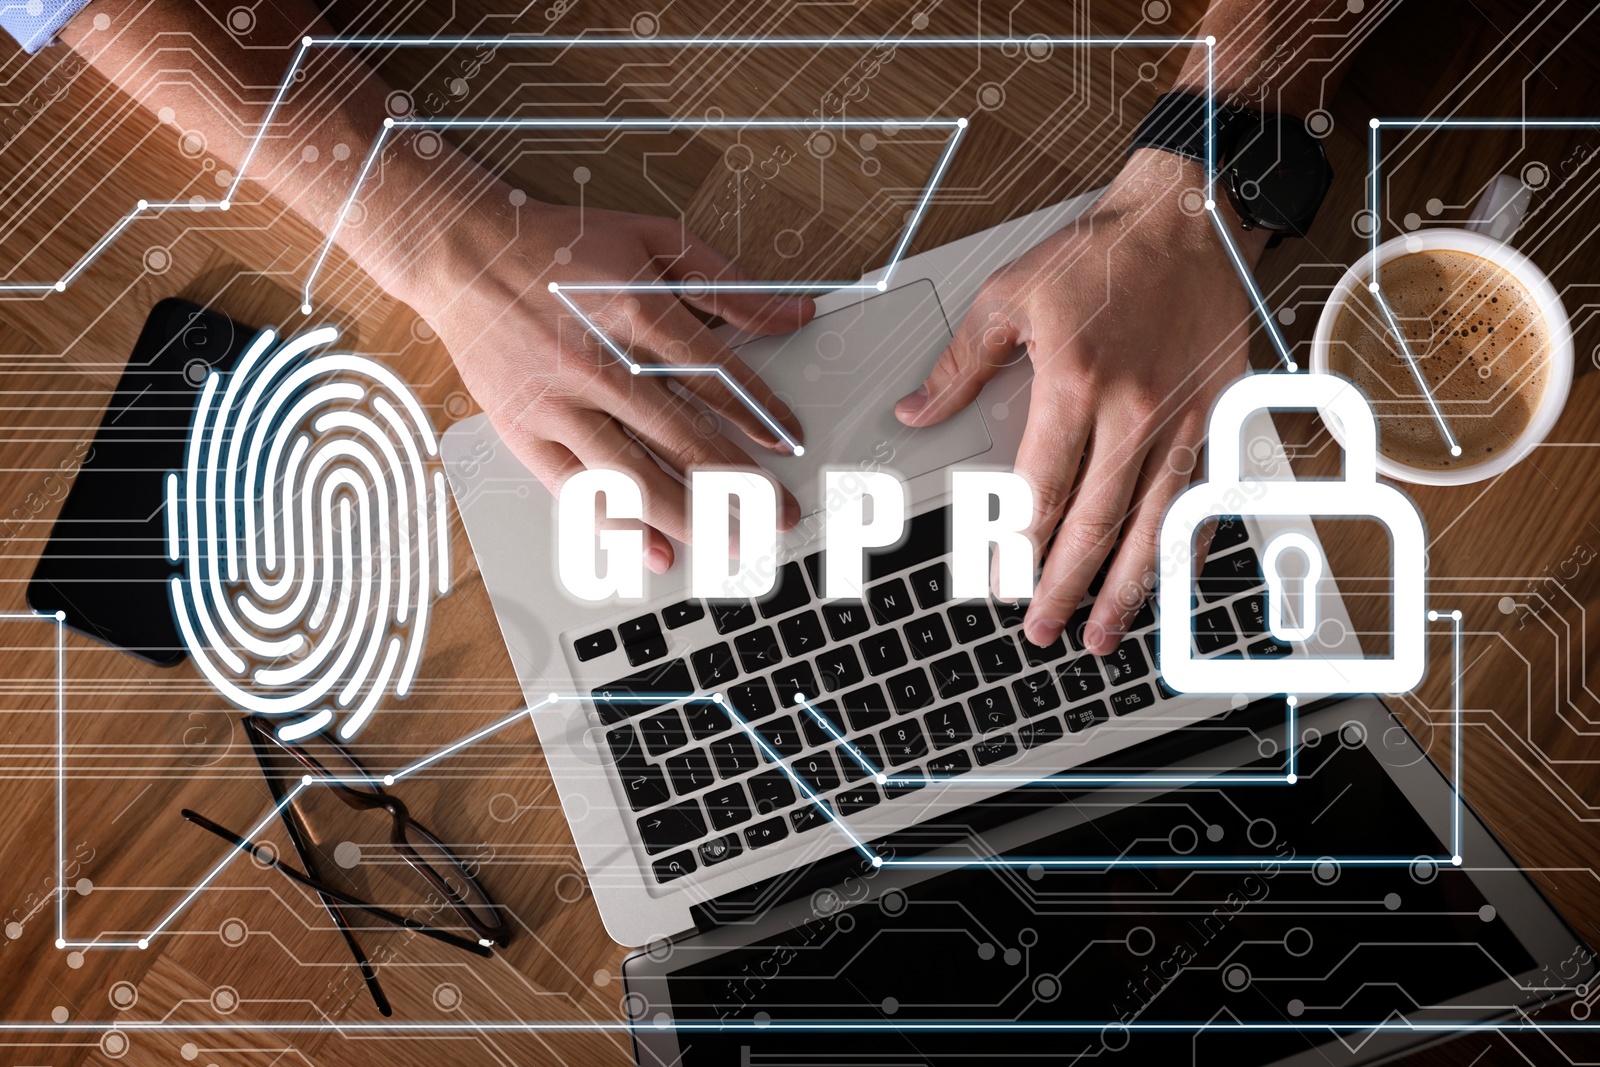 Image of General Data Protection Regulation. Man working with laptop, top view. GDPR abbreviation, fingerprint, padlock and circuit board pattern